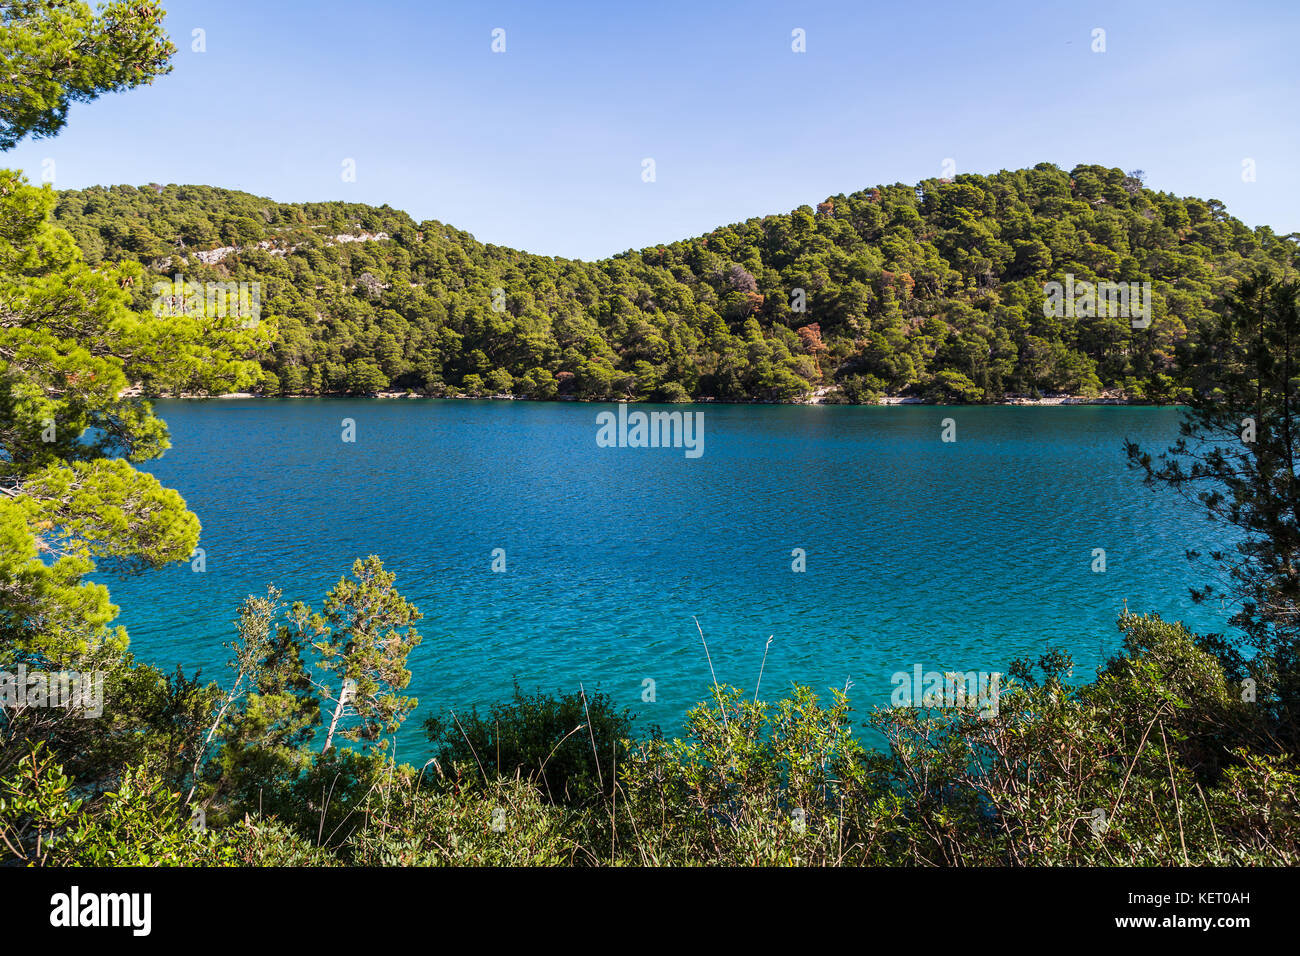 Mljet national park packed full of indigenous pine forests cover the steep slopes before reaching two inter-connected saltwater lakes. Stock Photo